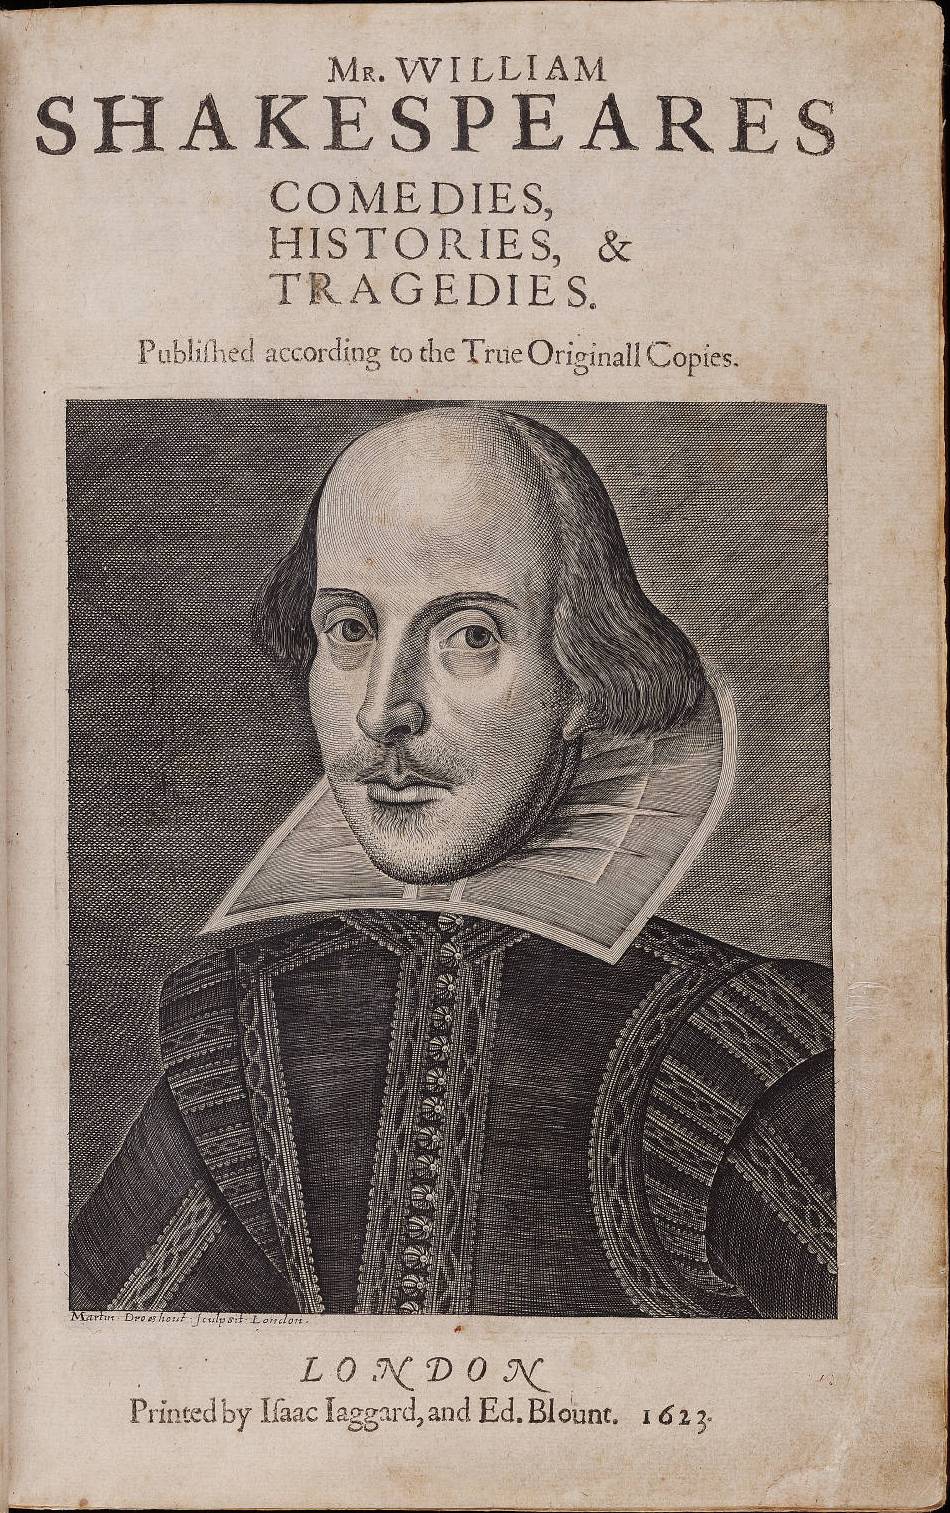 Shakespeare folio with the Droeshout portrait on the front.